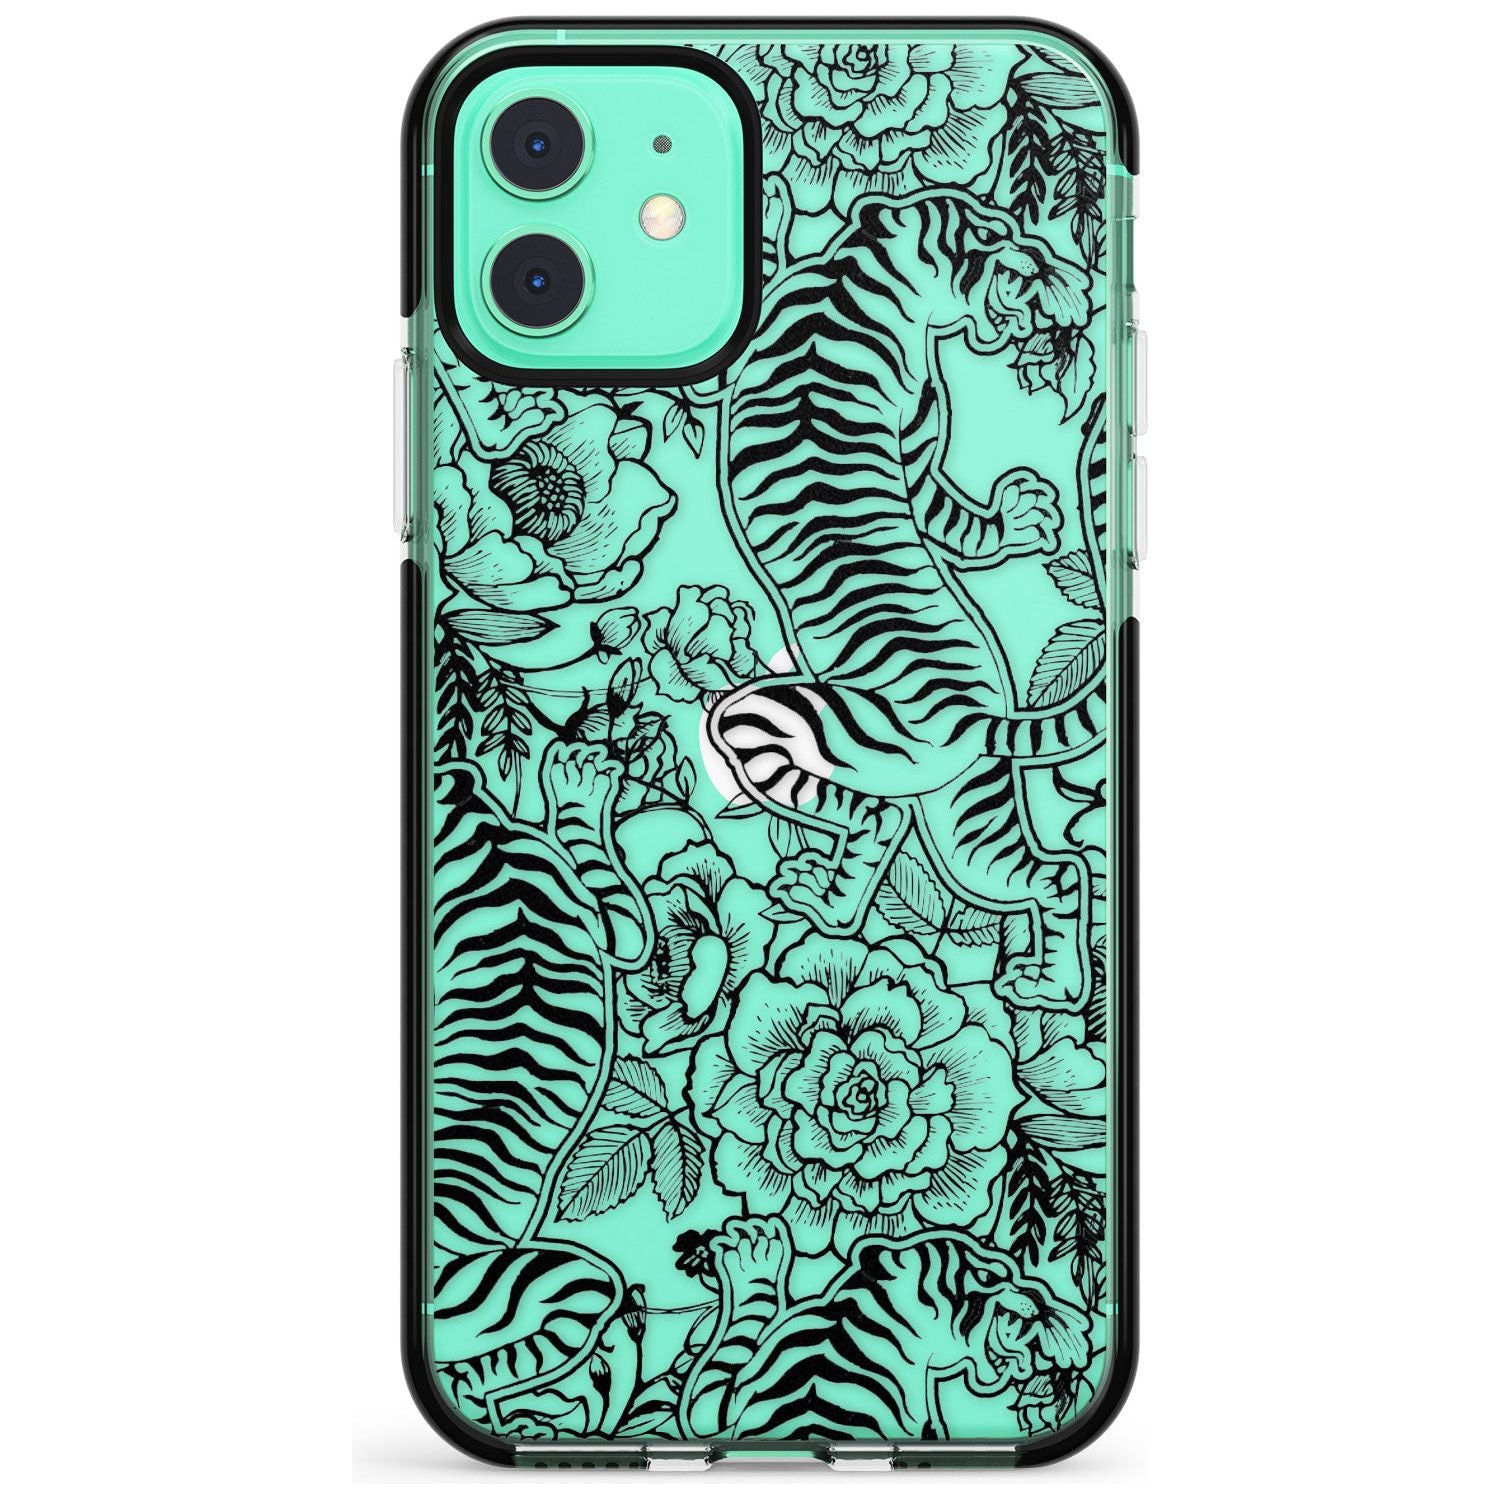 Personalised Chinese Tiger Pattern Black Impact Phone Case for iPhone 11 Pro Max